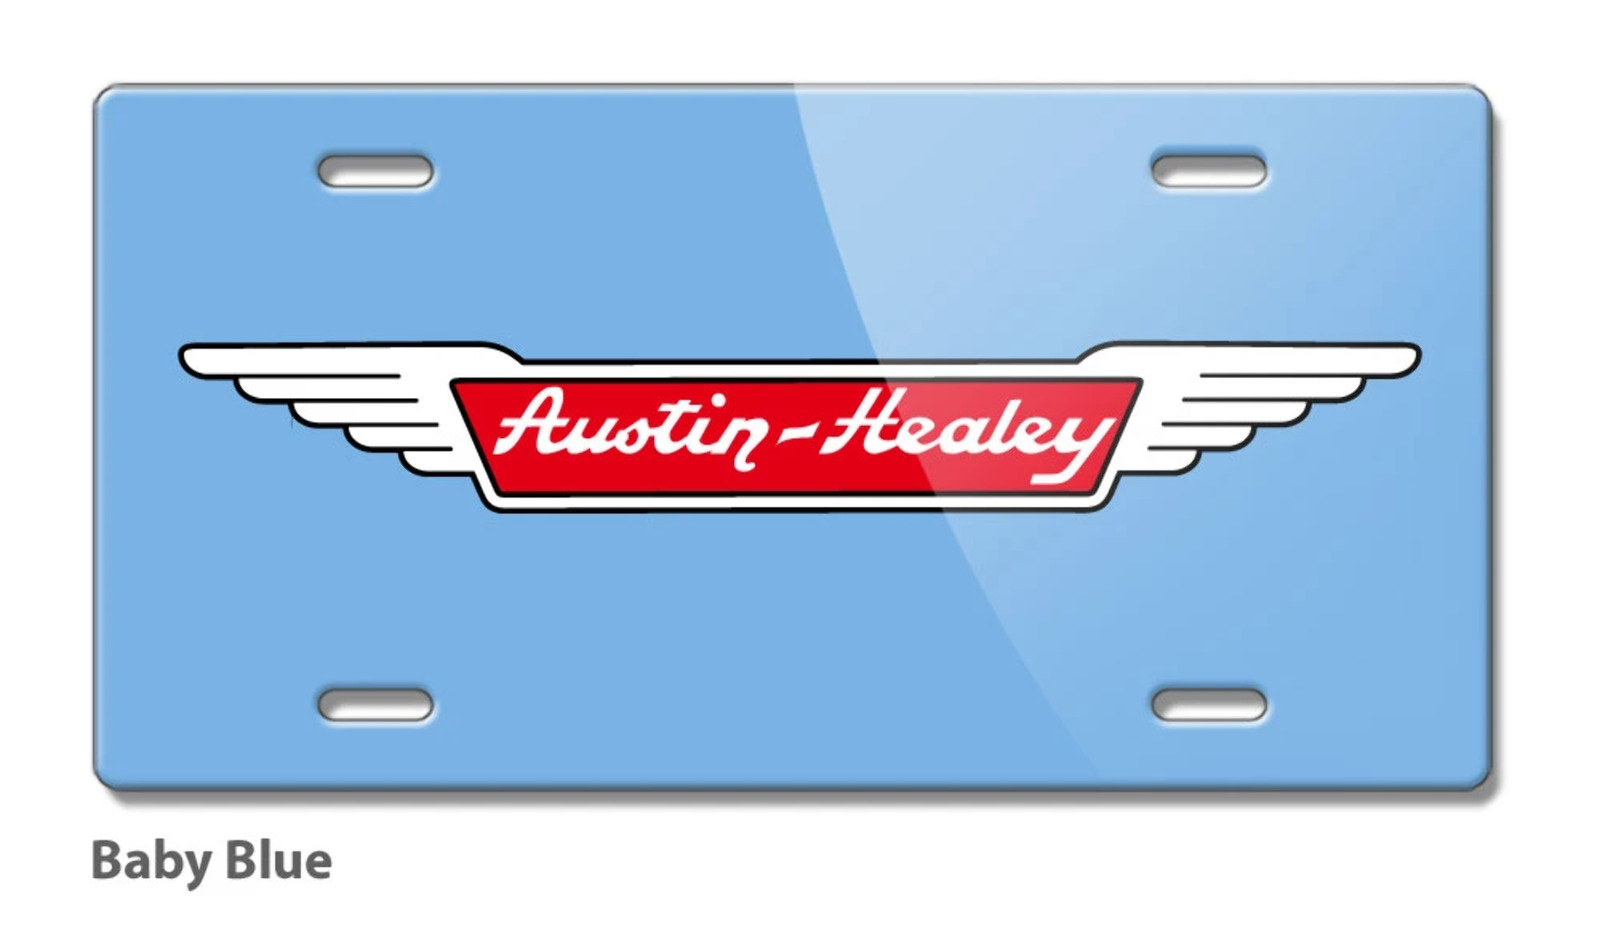 Austin Healey Badge Emblem Novelty License Plate - 16 colors - Made in the USA